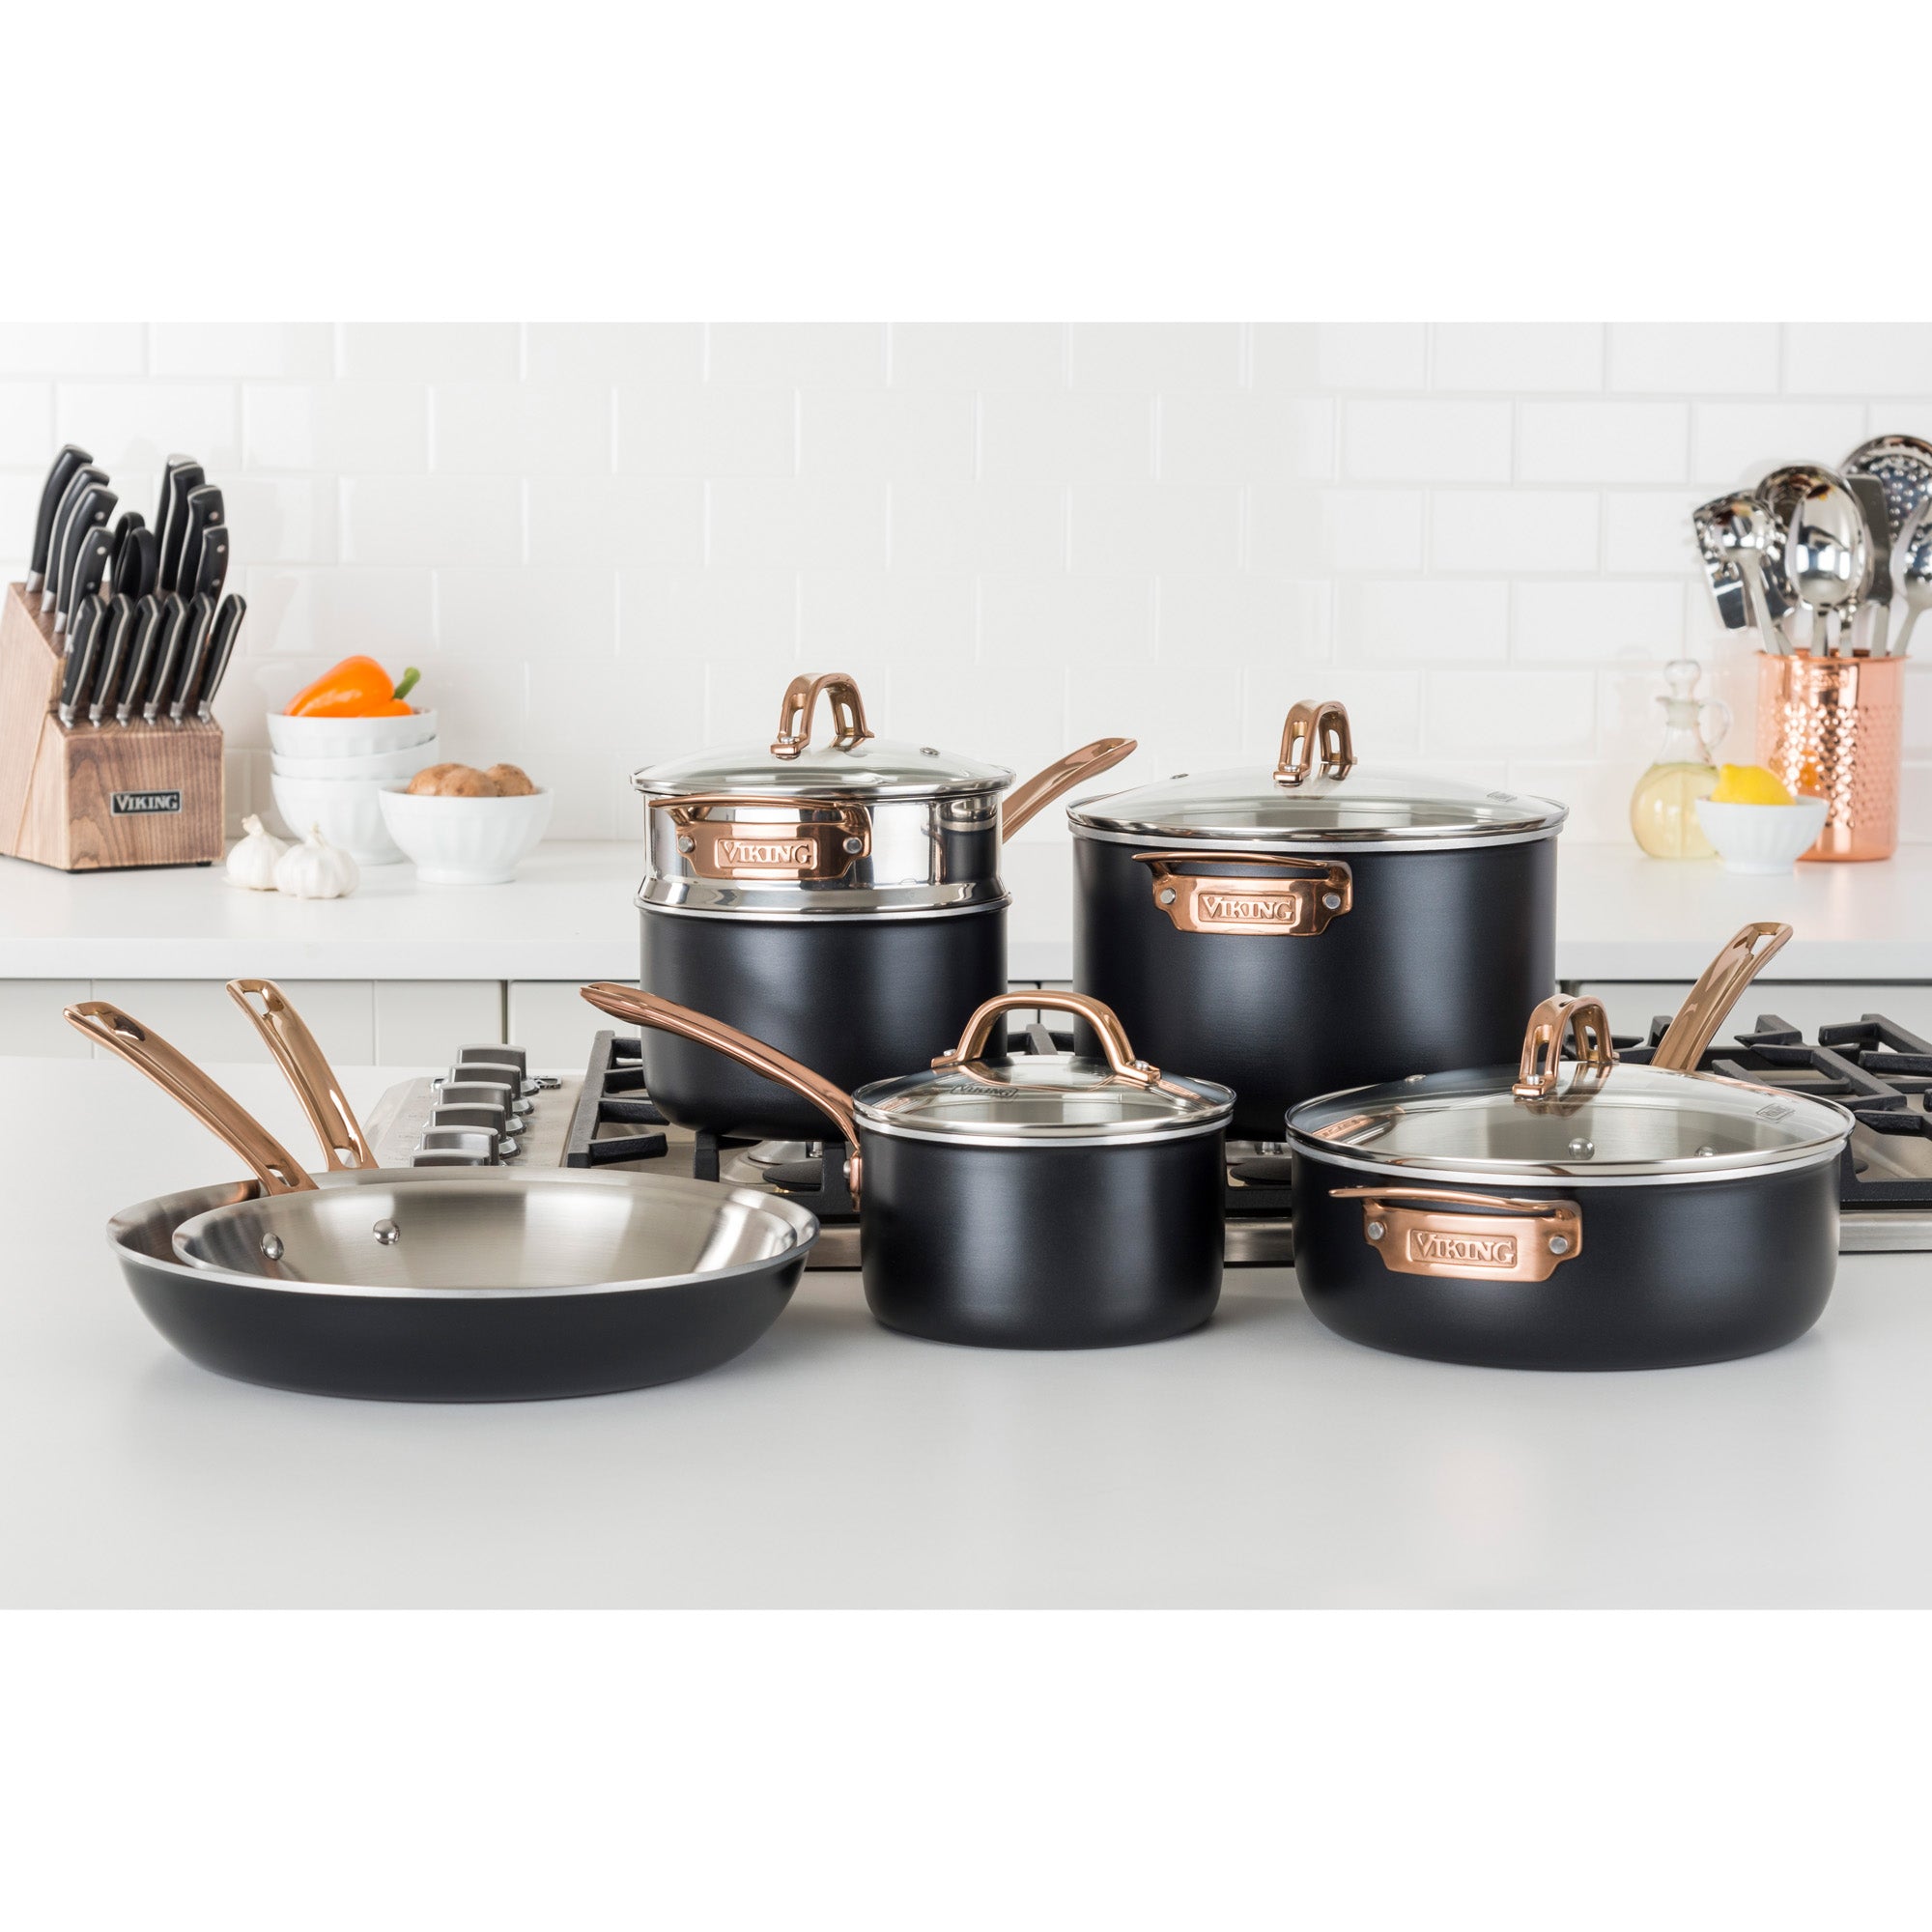 Viking 3-Ply 10 Piece Black and Copper Cookware Set with Glass Lids